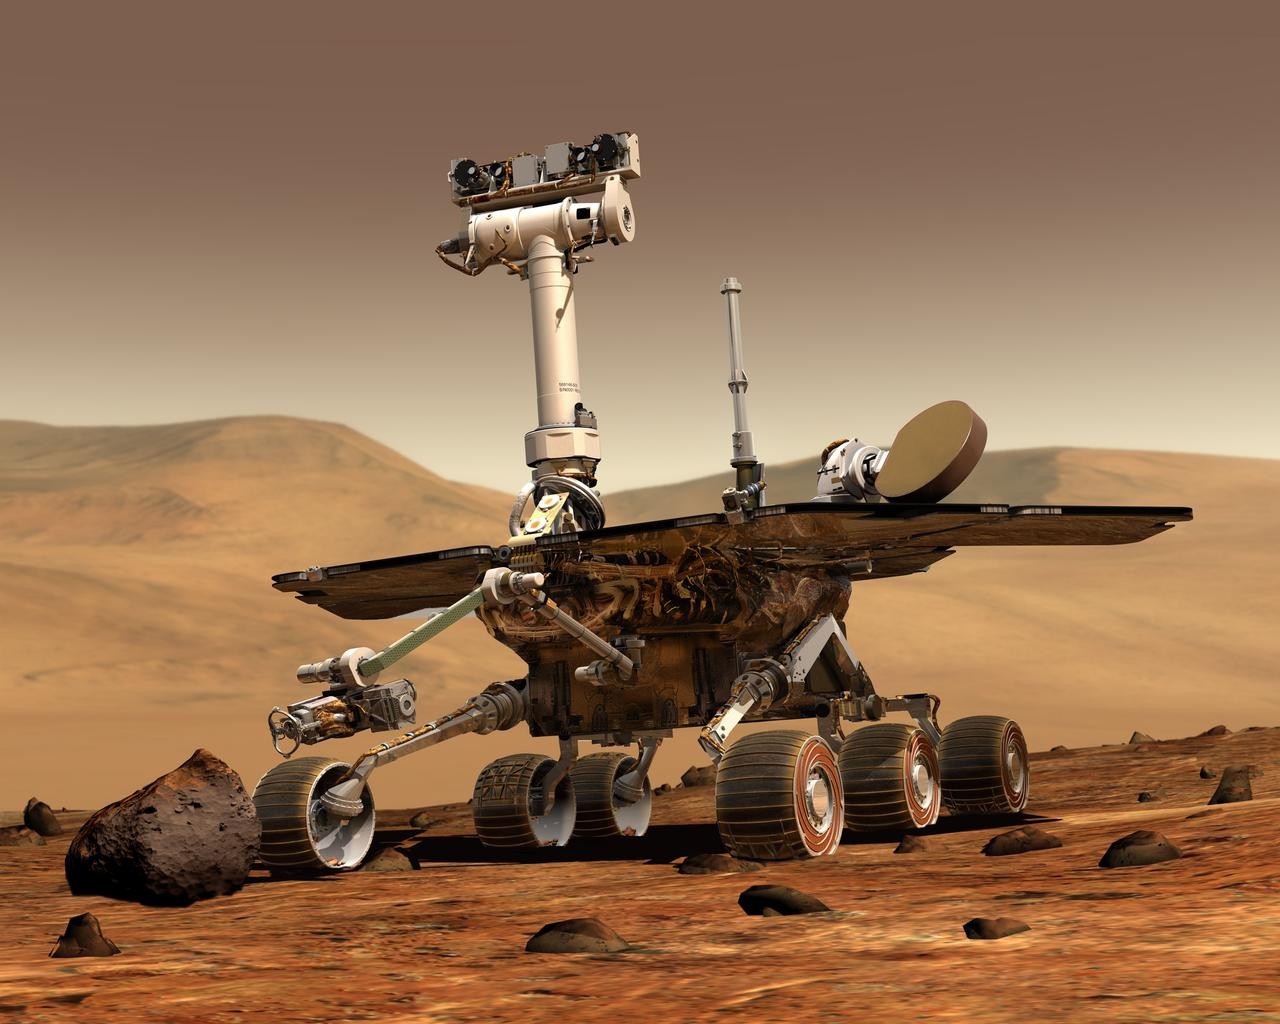 An artist's rendering of Opportunity, one of two rovers launched in 2003 to explore Mars. (NASA/JPL/Cornell University)